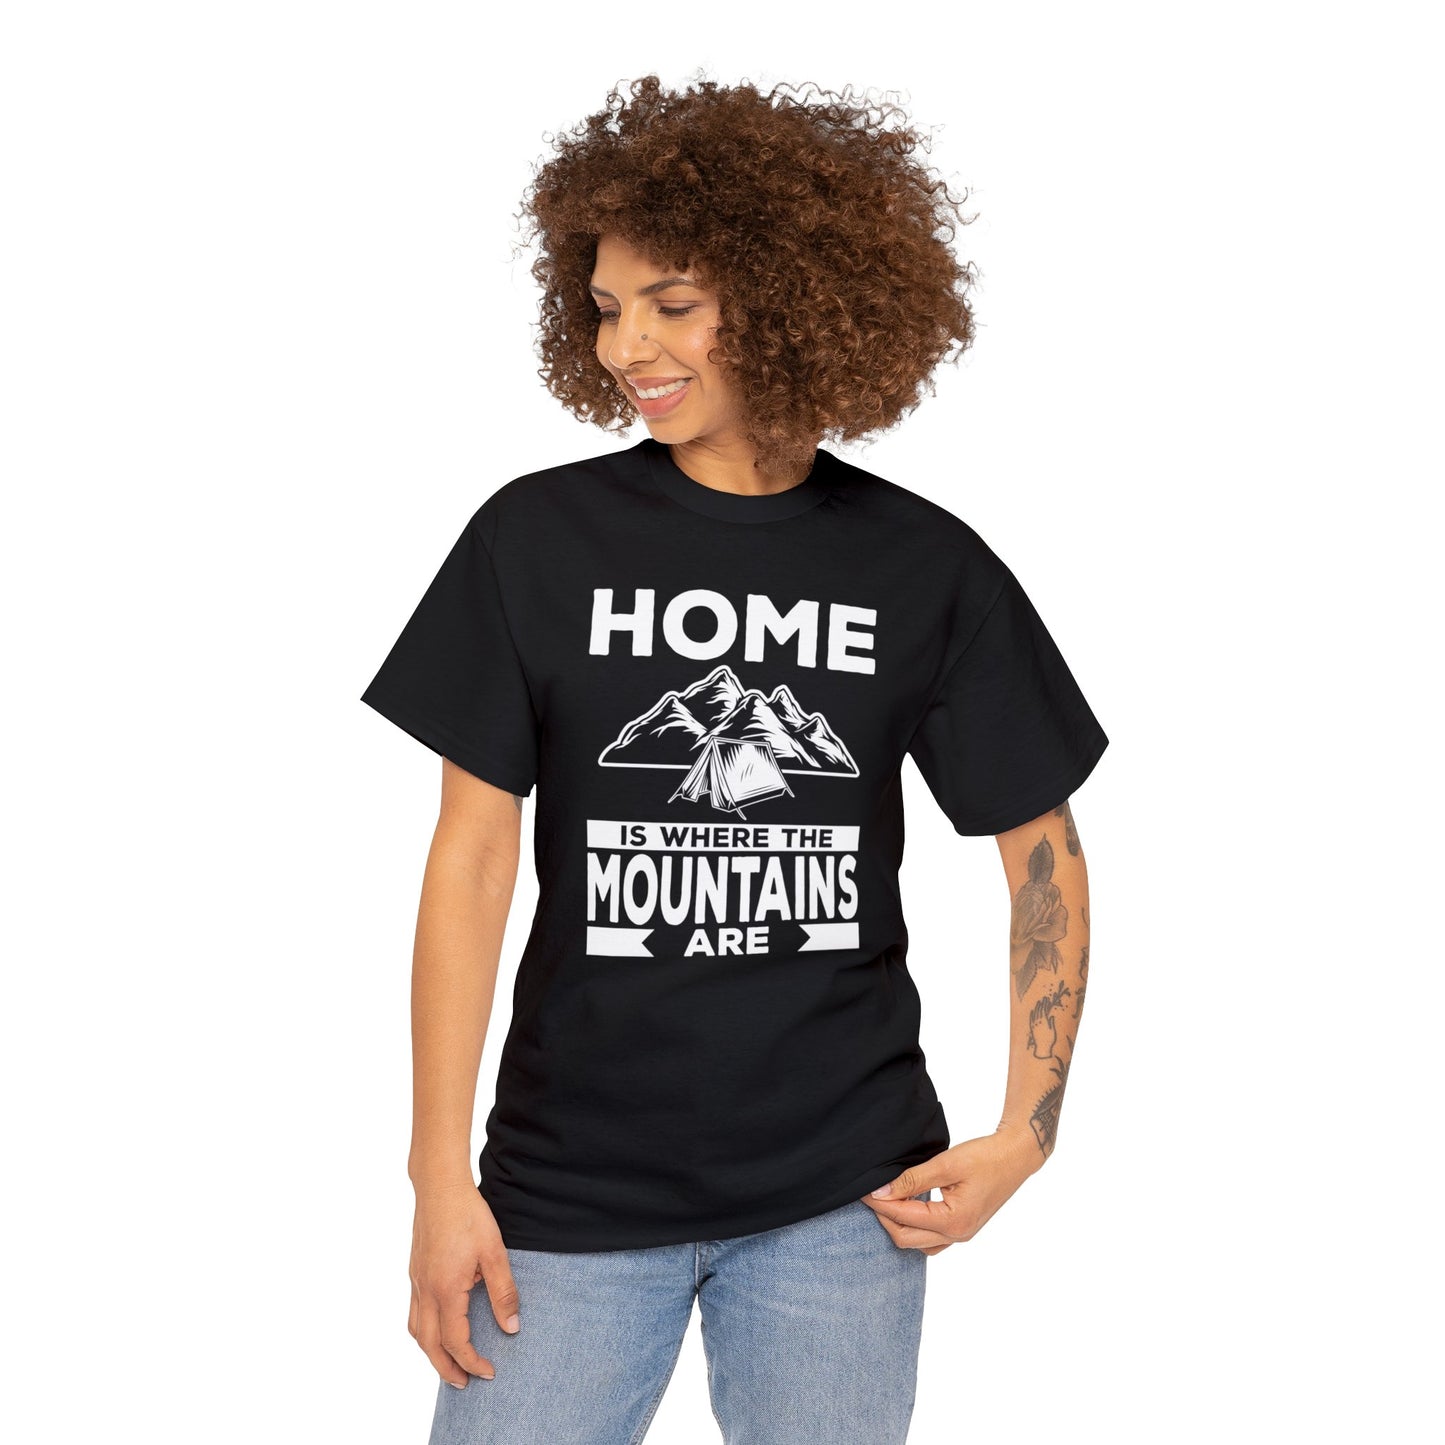 Discover Comfort in Nature: 'Home is Where The Mountains Are' T-shirt